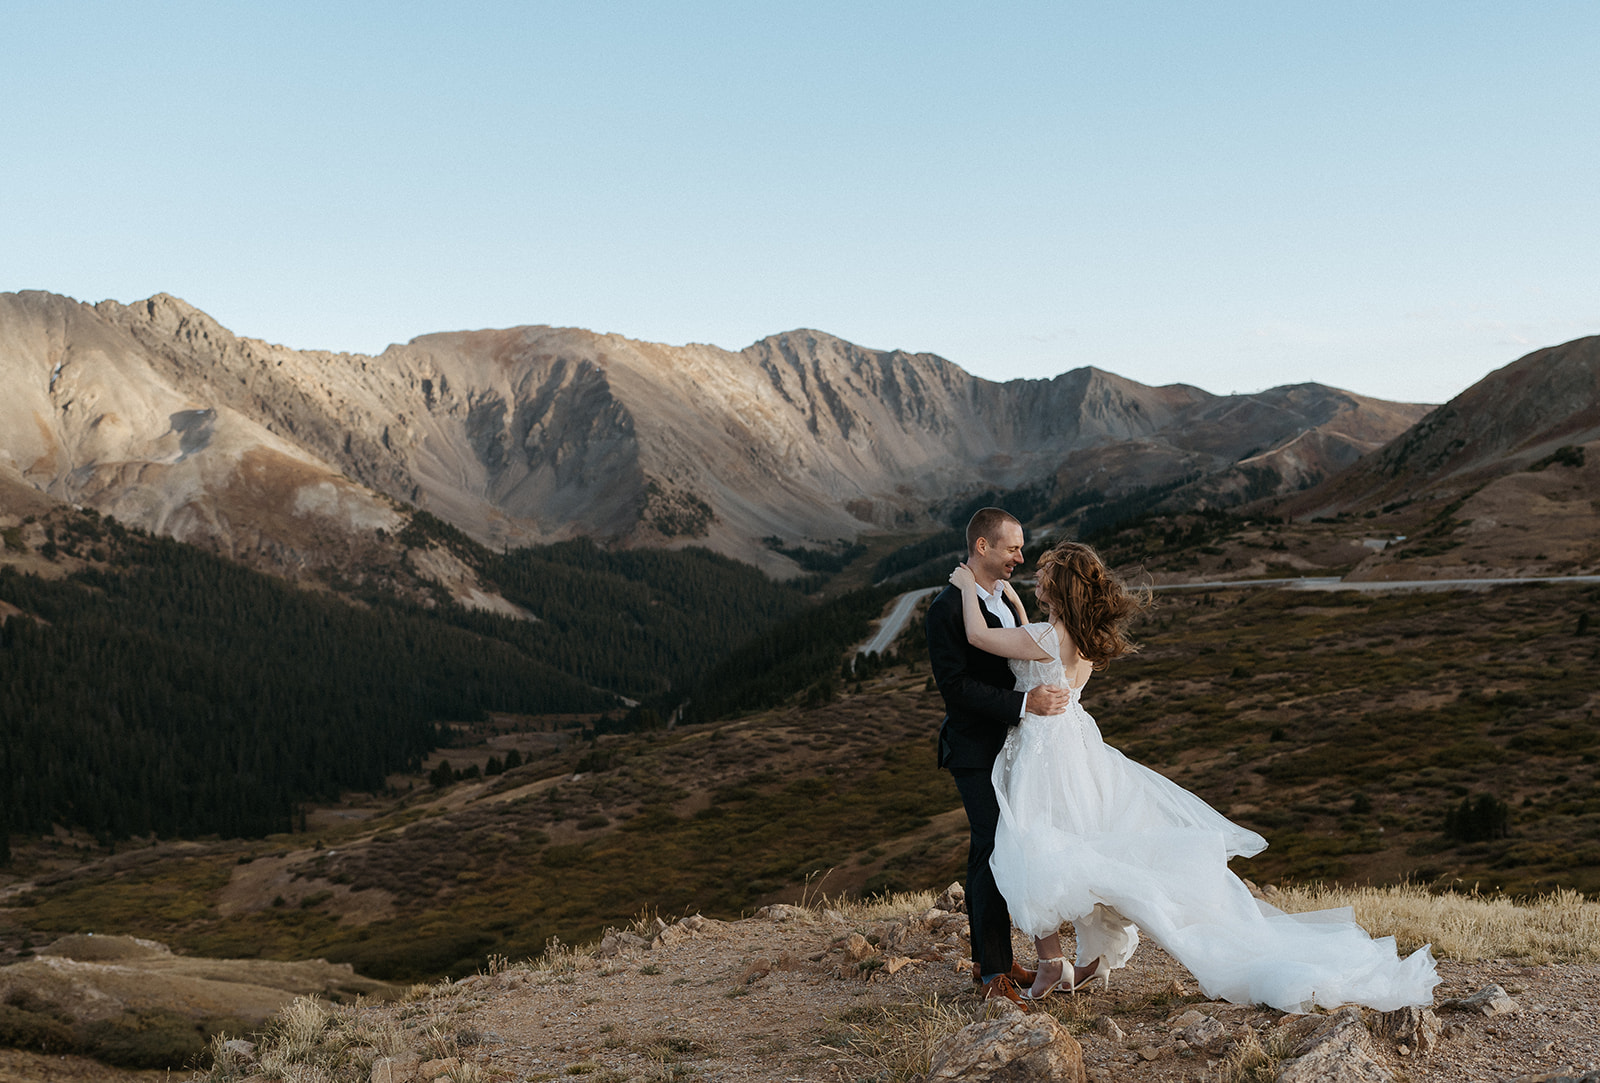 Newlyweds share an intimate moment on a rocky mountainside on a windy day